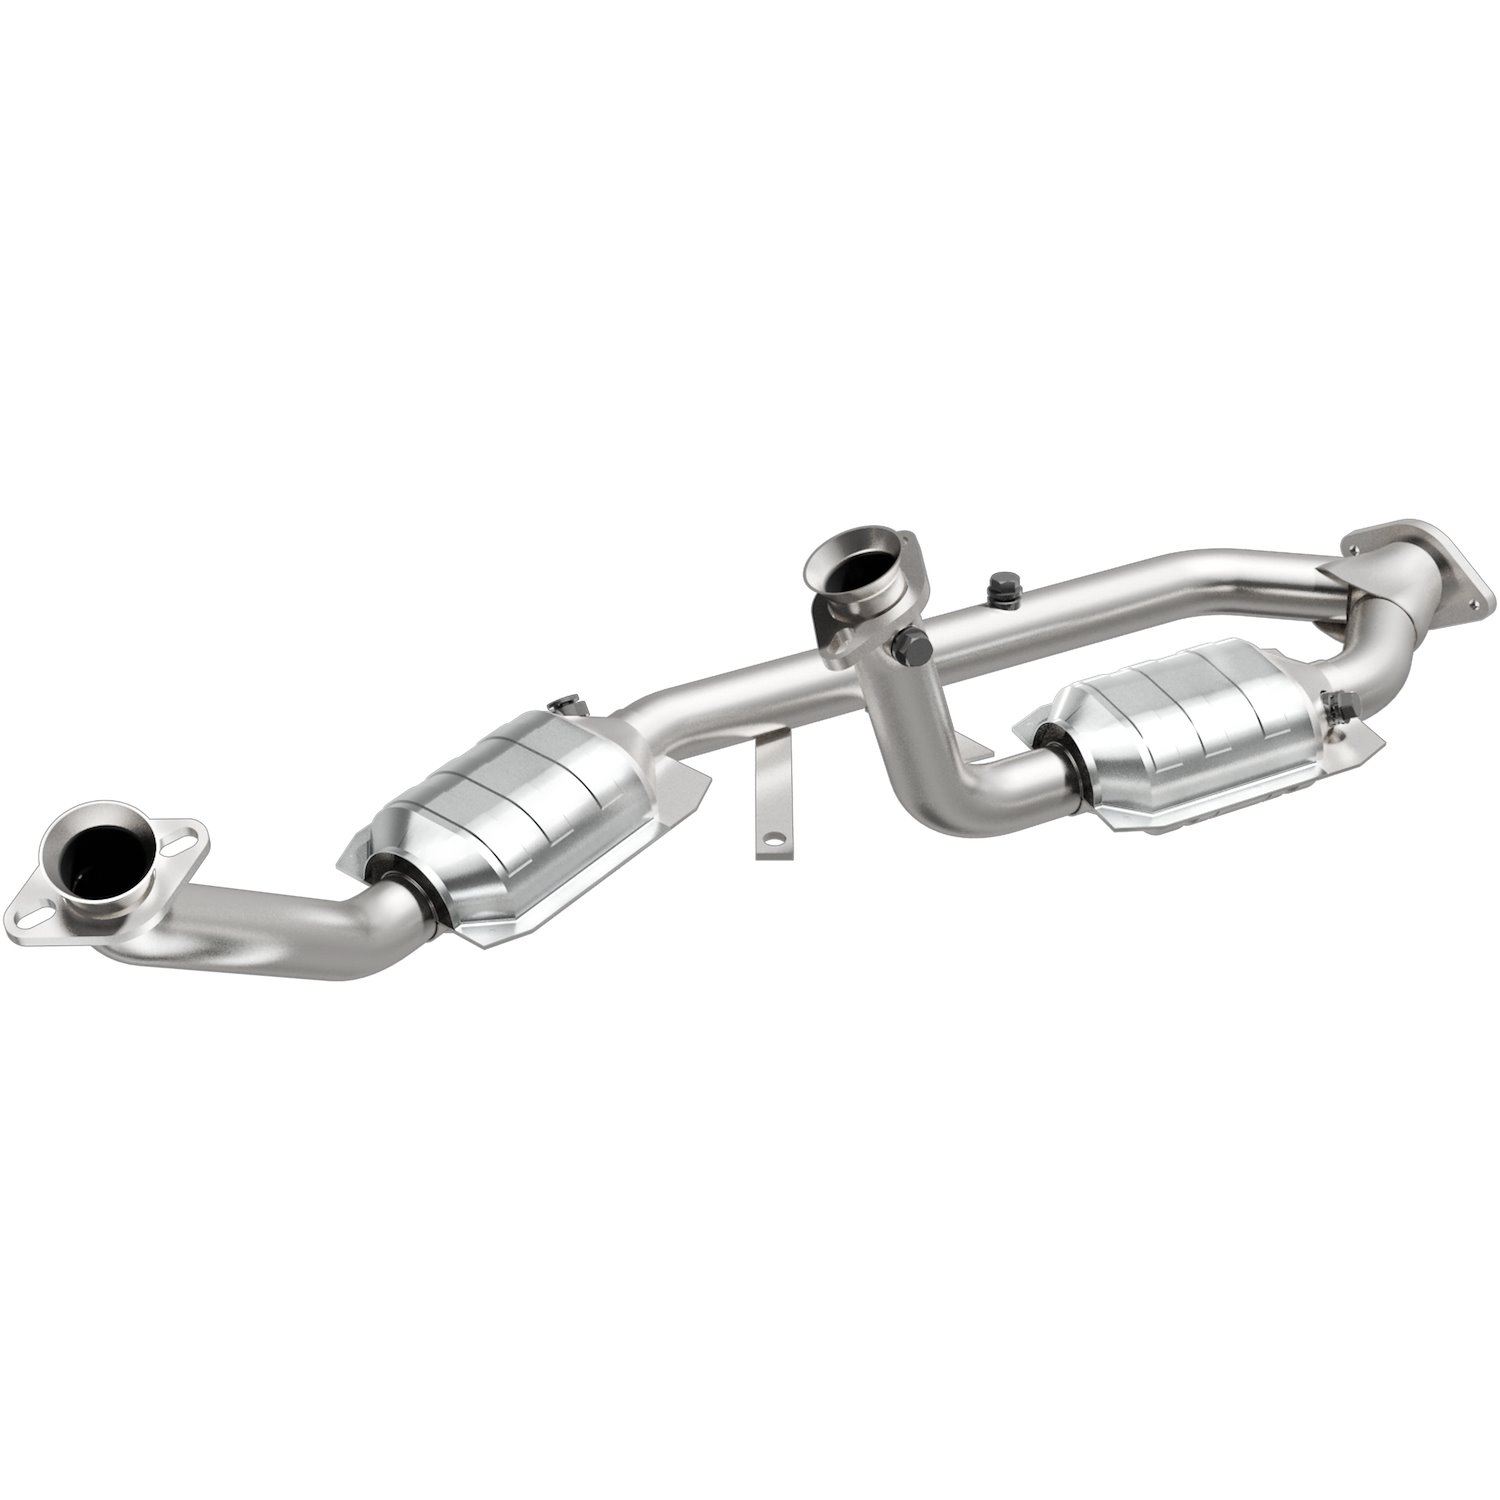 1997-1998 Ford Windstar HM Grade Federal / EPA Compliant Direct-Fit Catalytic Converter